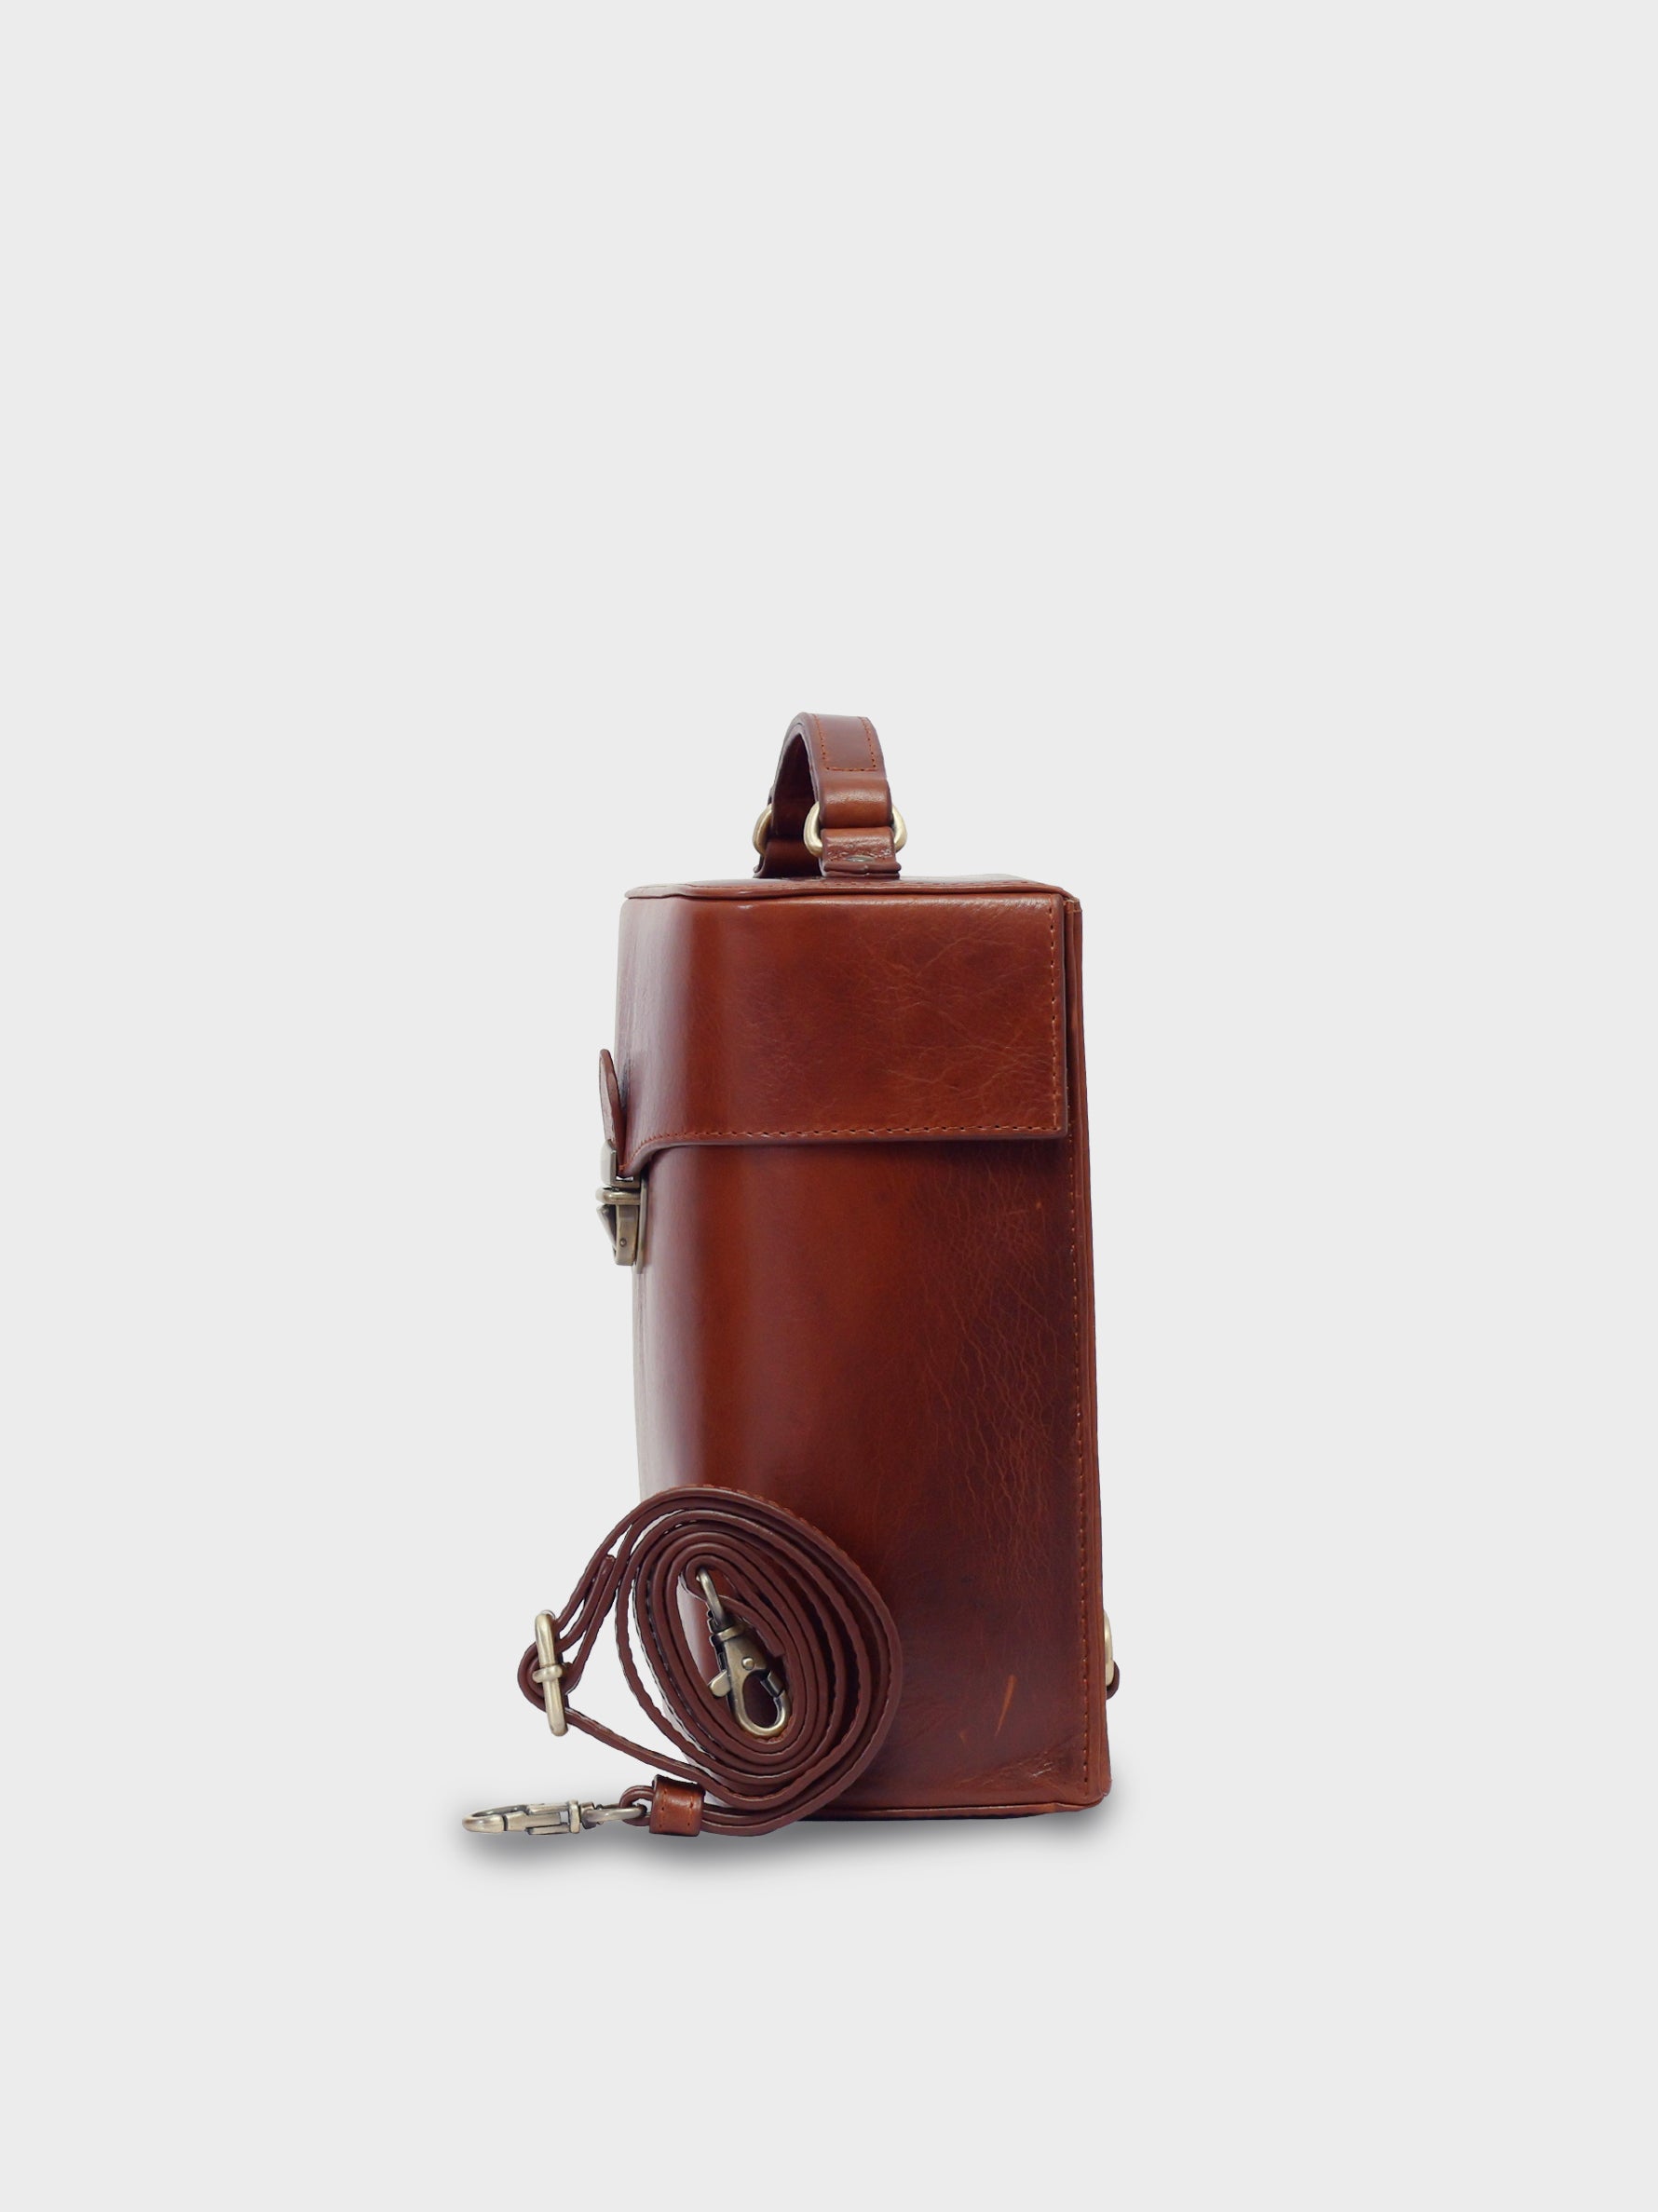 Handcrafted Genuine Vegetable Tanned Leather Letter Box Backpack Vintage Brown for Women Tan & Loom